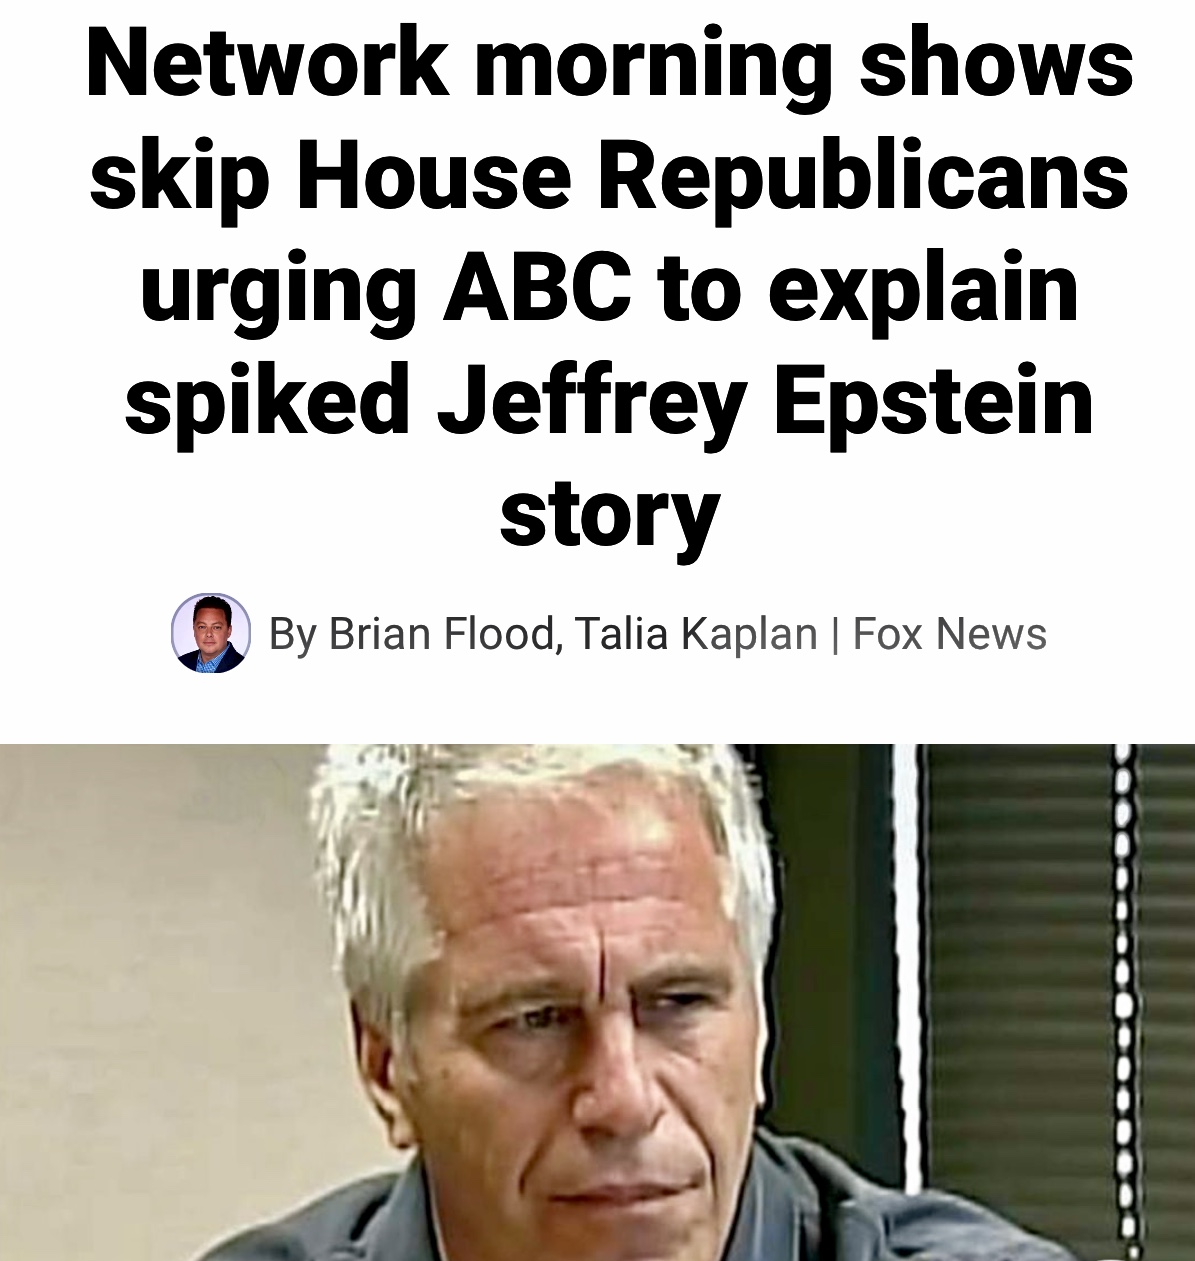 GOP Leader Kevin McCarthy Wrote to ABC News Demanding ABC Hand Over the Video Amy Robach Conducted re: Epstein